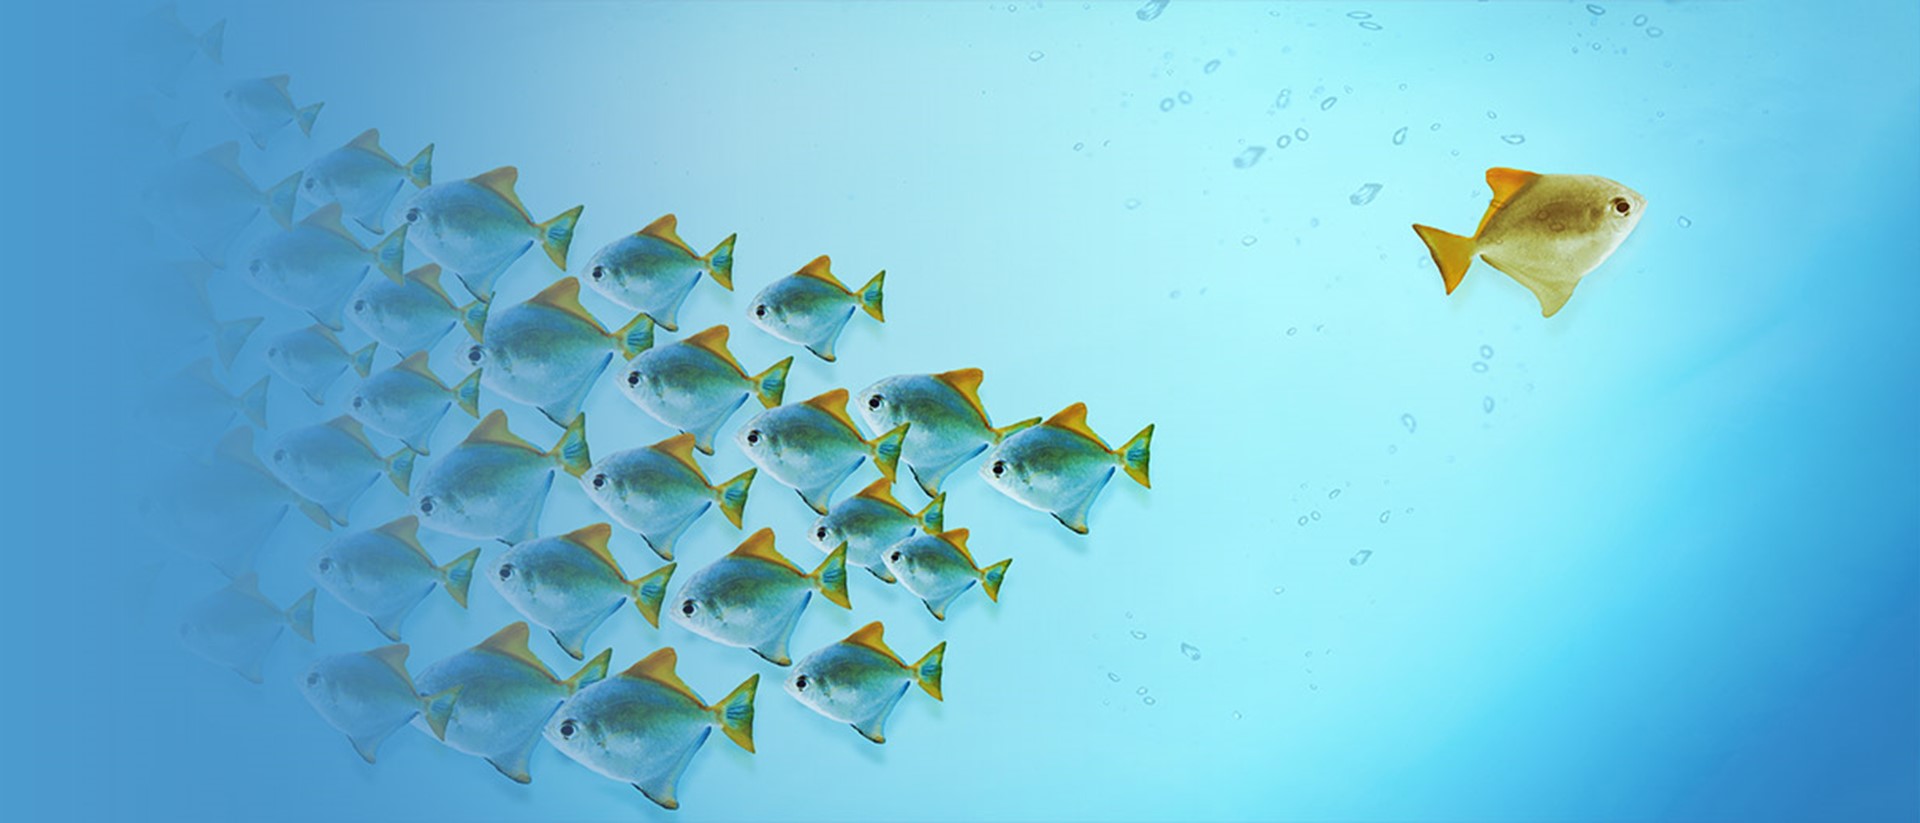 Image of fishes on a blue background